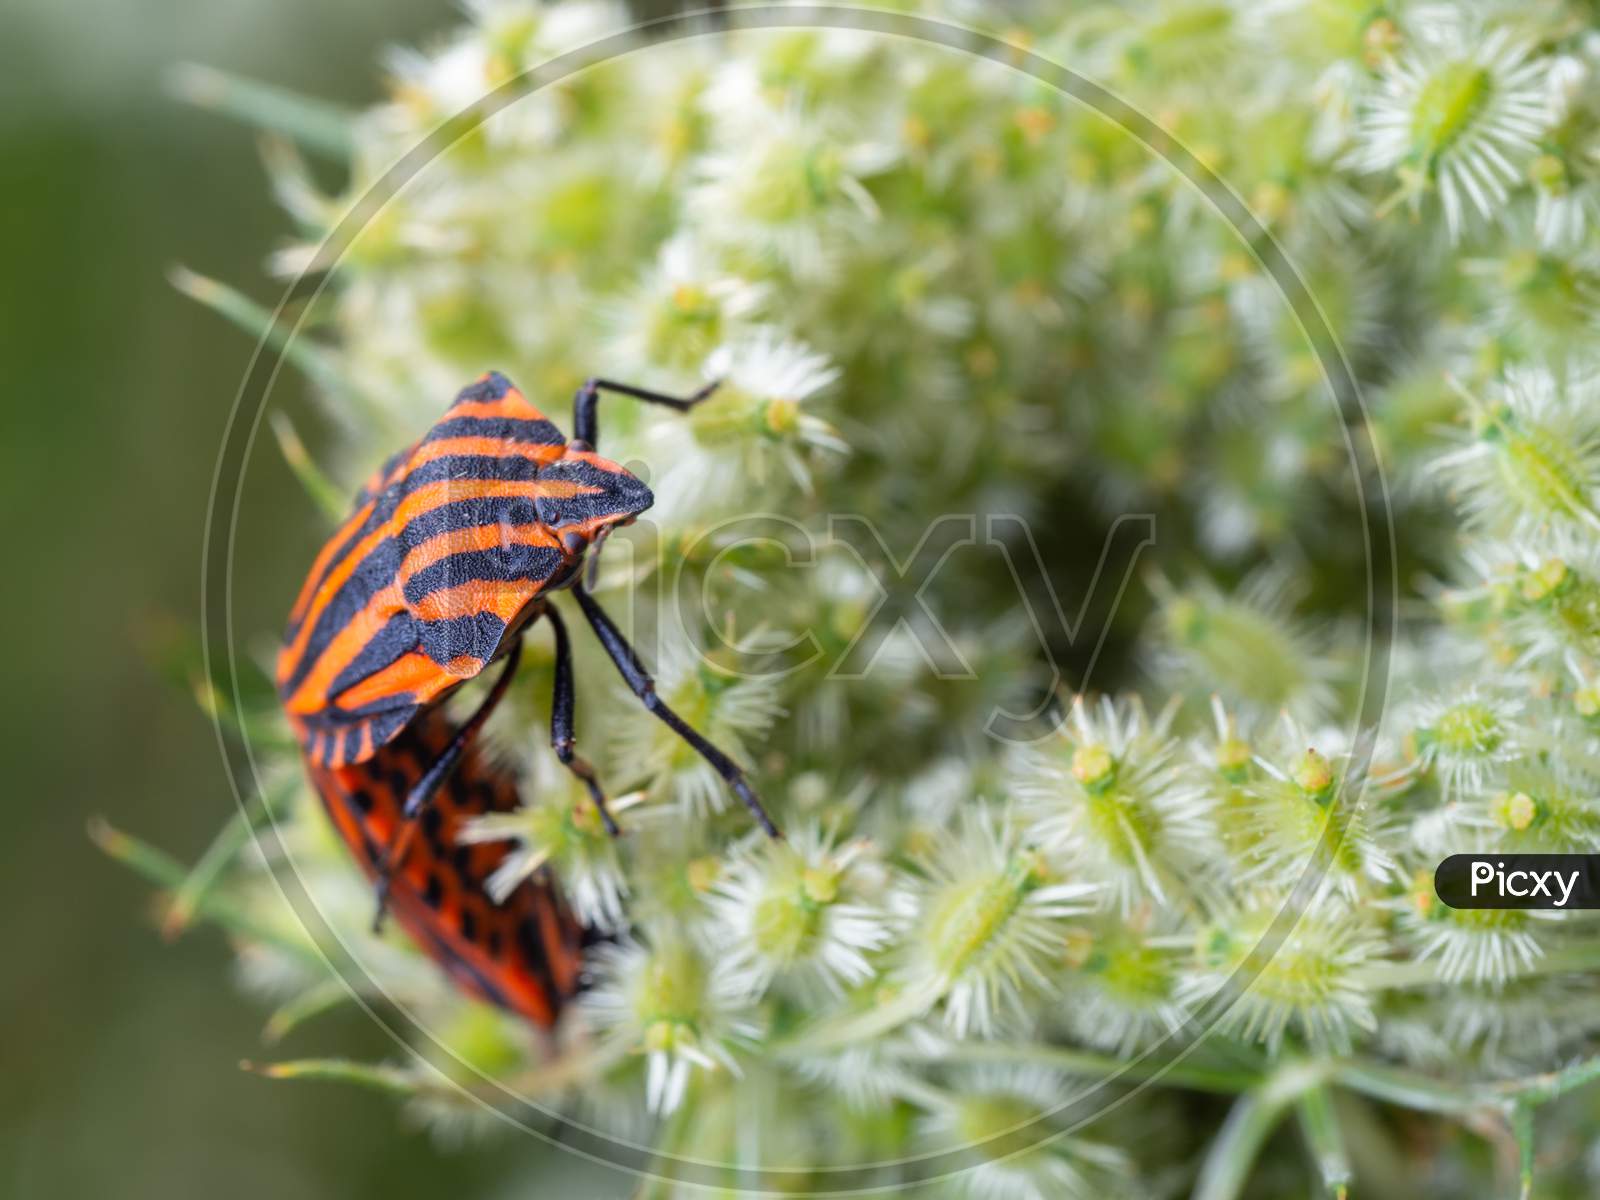 Close-Up Of A Pair Of Italian Striped Bugs Mating On The White Wild Flower.